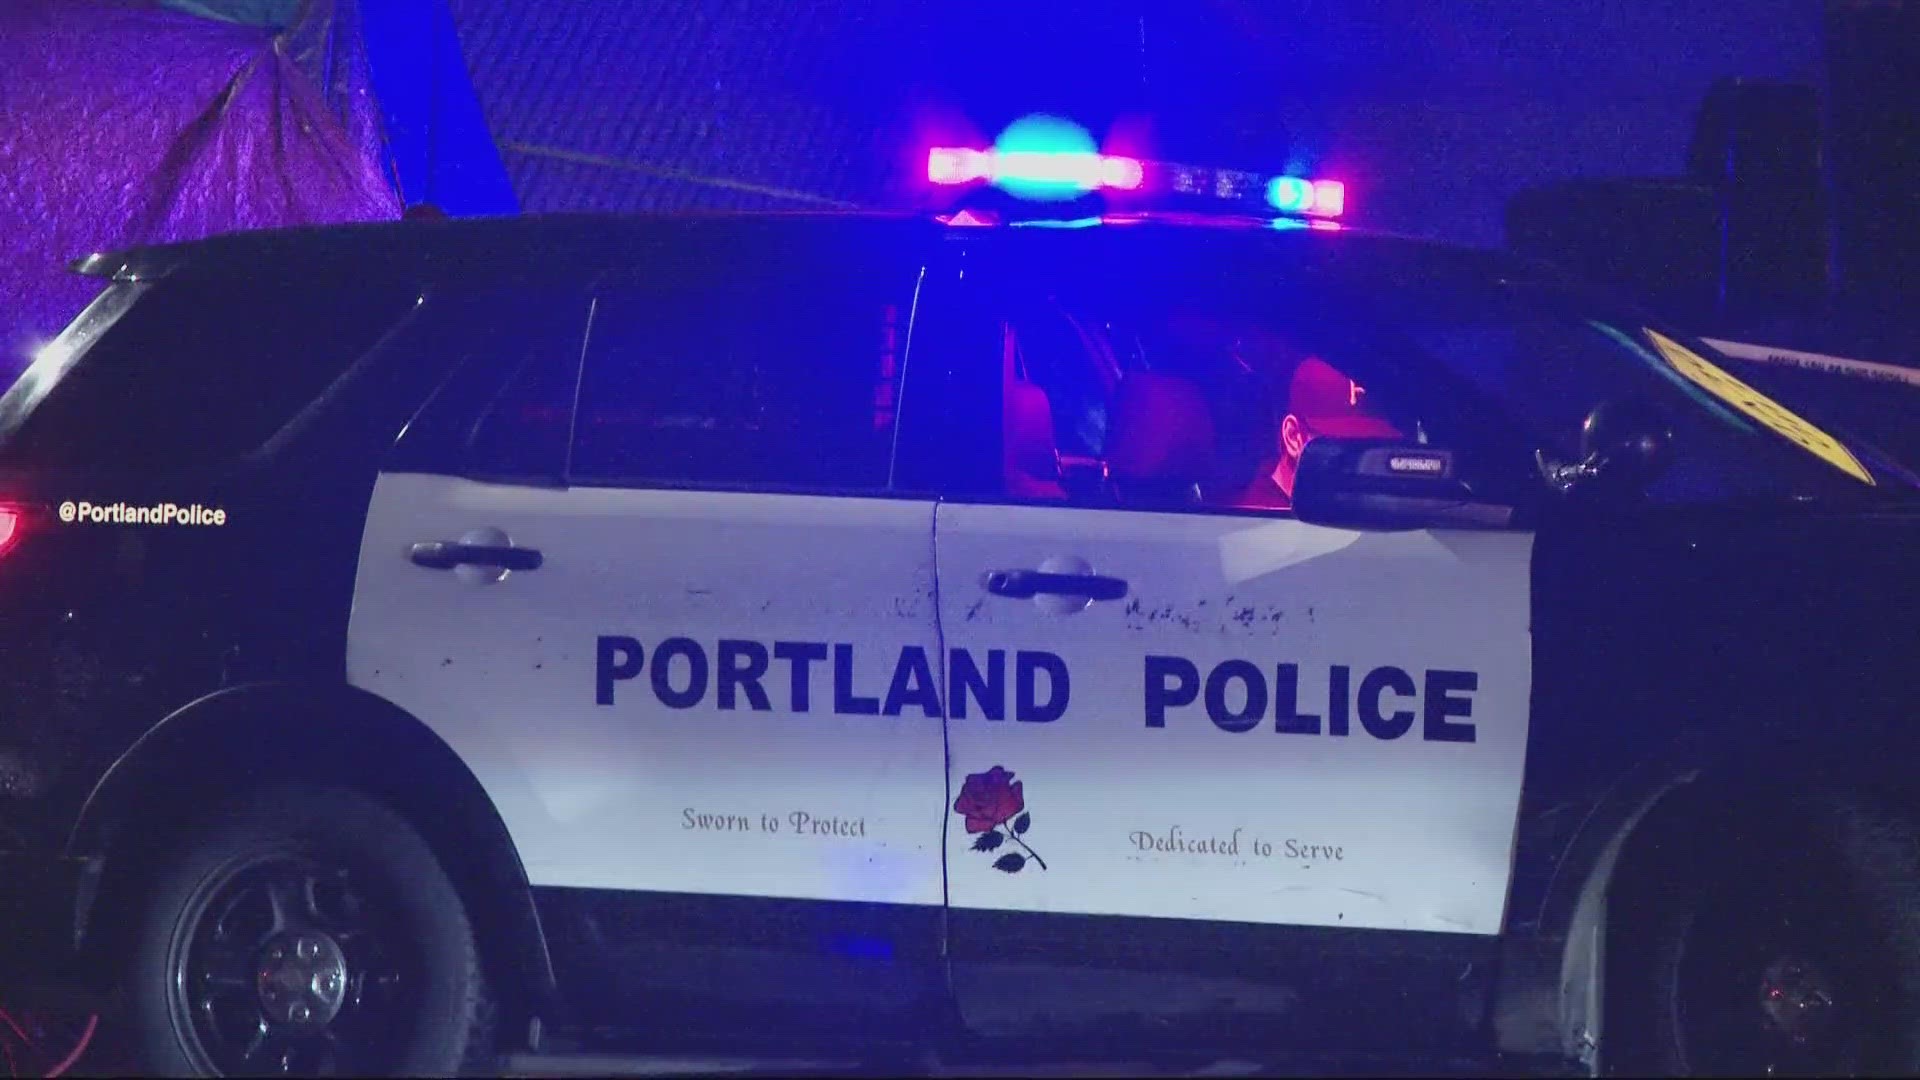 Portland police say they found the man injured at the scene but died from his injuries,